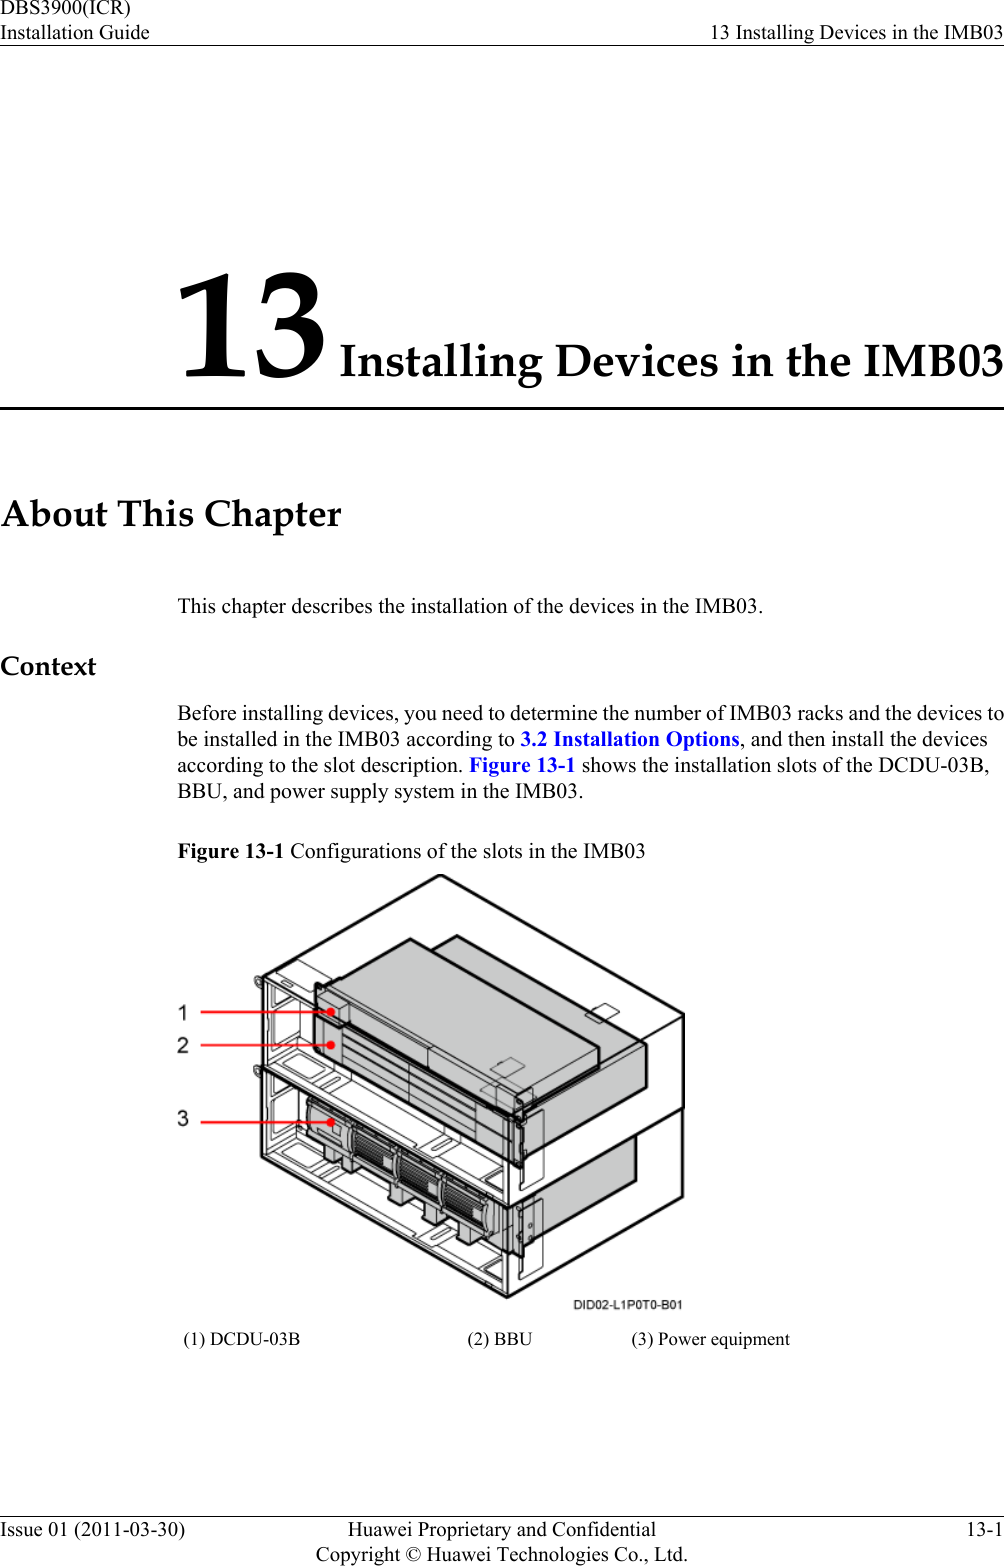 13 Installing Devices in the IMB03About This ChapterThis chapter describes the installation of the devices in the IMB03.ContextBefore installing devices, you need to determine the number of IMB03 racks and the devices tobe installed in the IMB03 according to 3.2 Installation Options, and then install the devicesaccording to the slot description. Figure 13-1 shows the installation slots of the DCDU-03B,BBU, and power supply system in the IMB03.Figure 13-1 Configurations of the slots in the IMB03(1) DCDU-03B (2) BBU (3) Power equipmentDBS3900(ICR)Installation Guide 13 Installing Devices in the IMB03Issue 01 (2011-03-30) Huawei Proprietary and ConfidentialCopyright © Huawei Technologies Co., Ltd.13-1